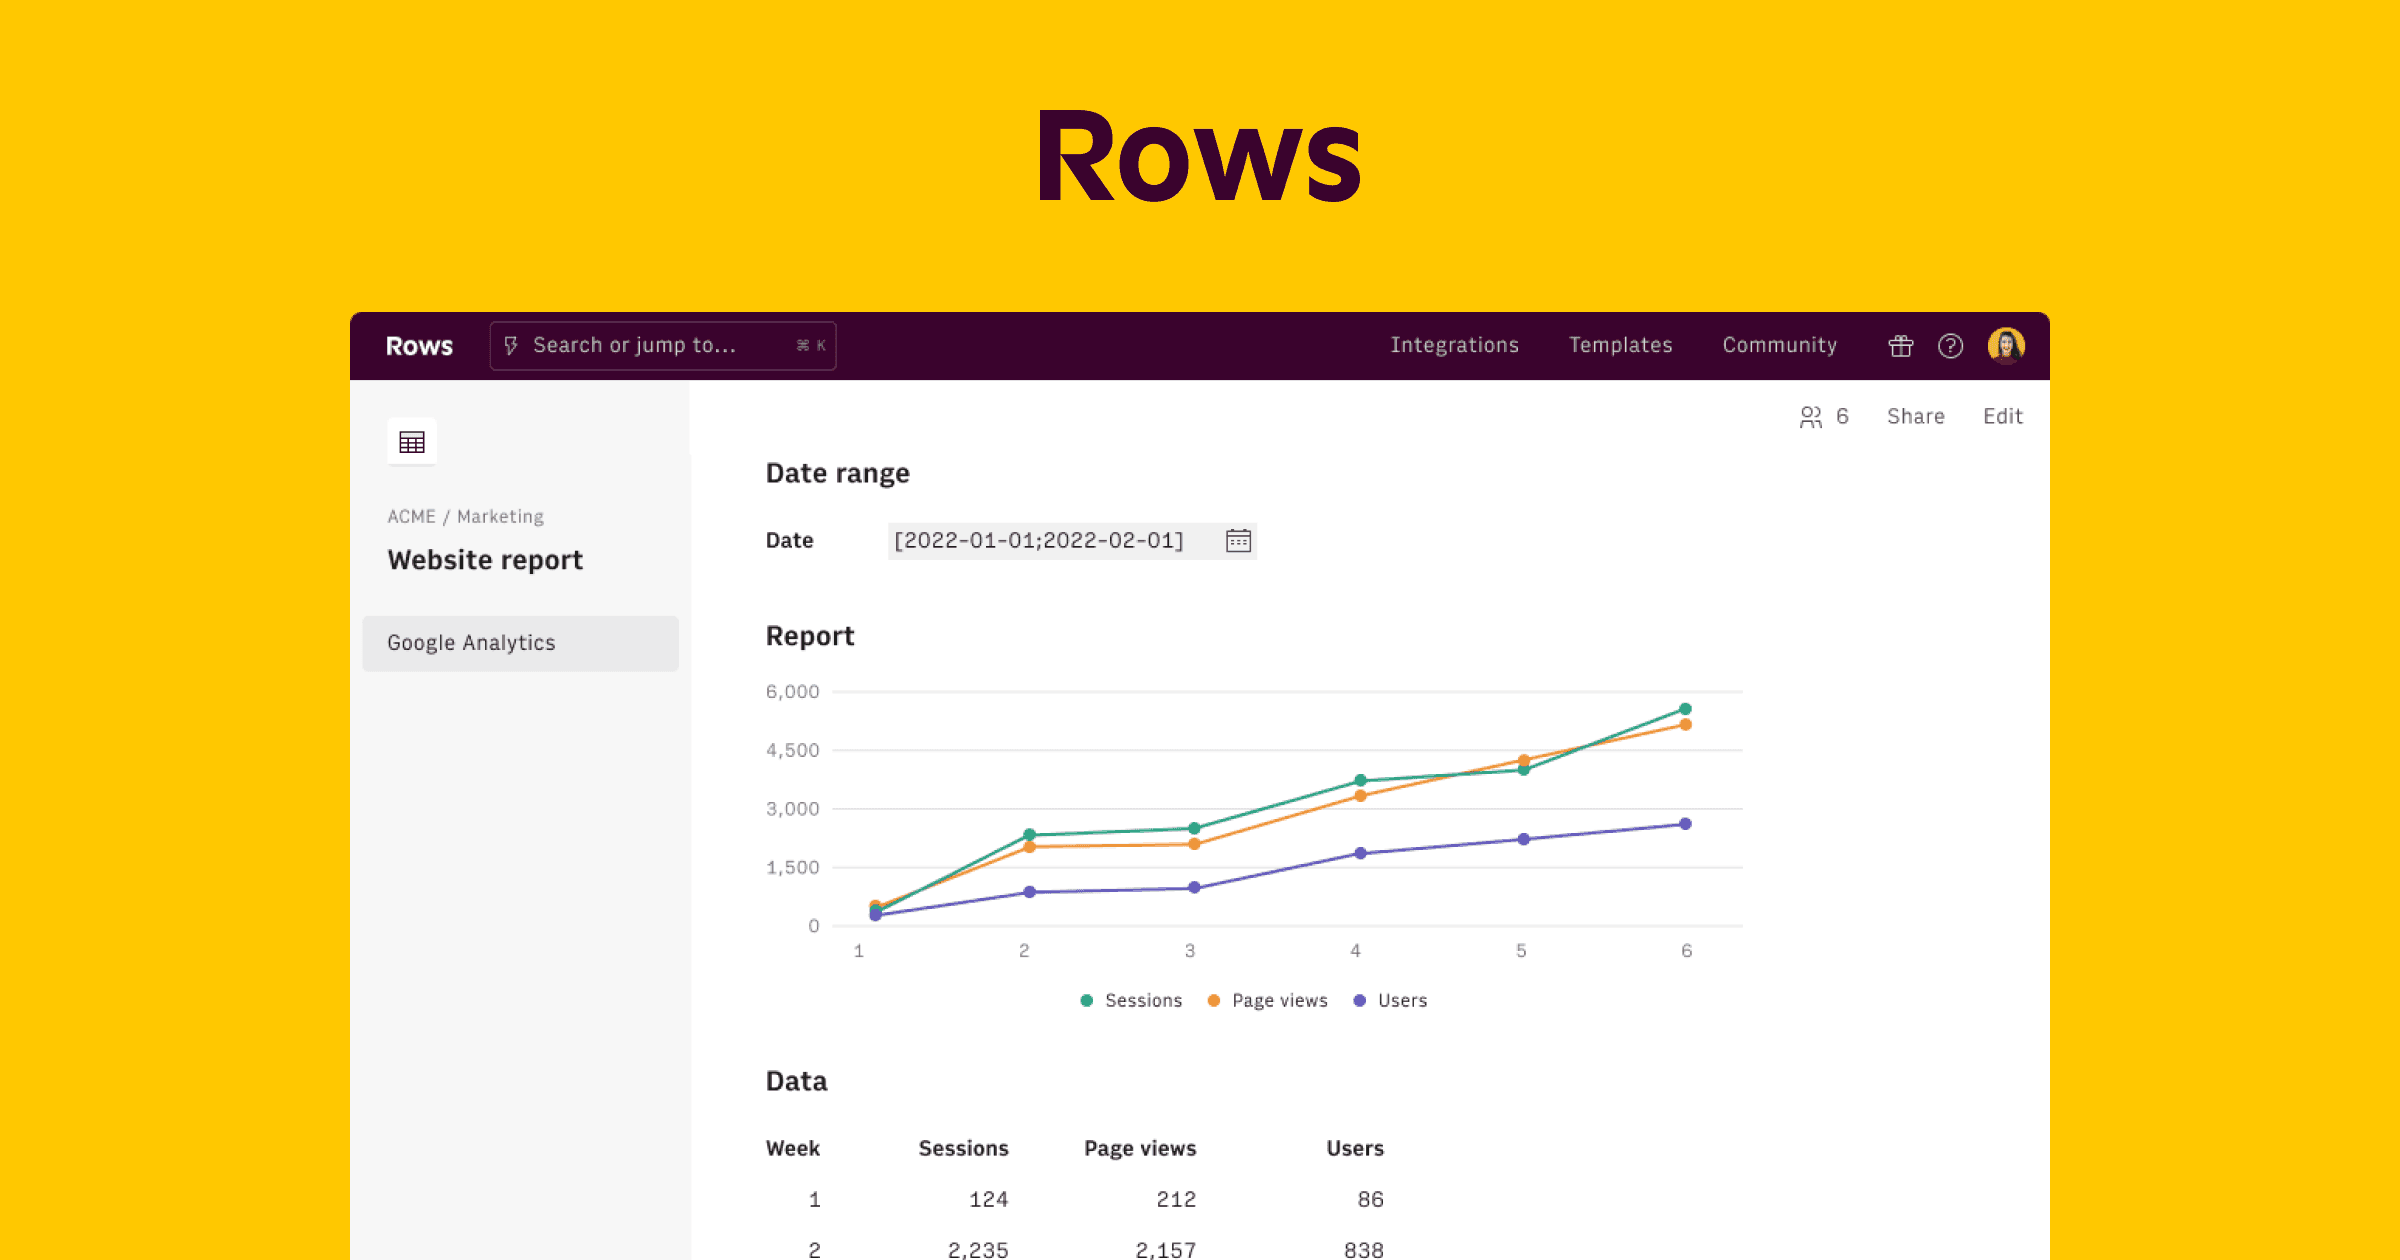 Product: Rows